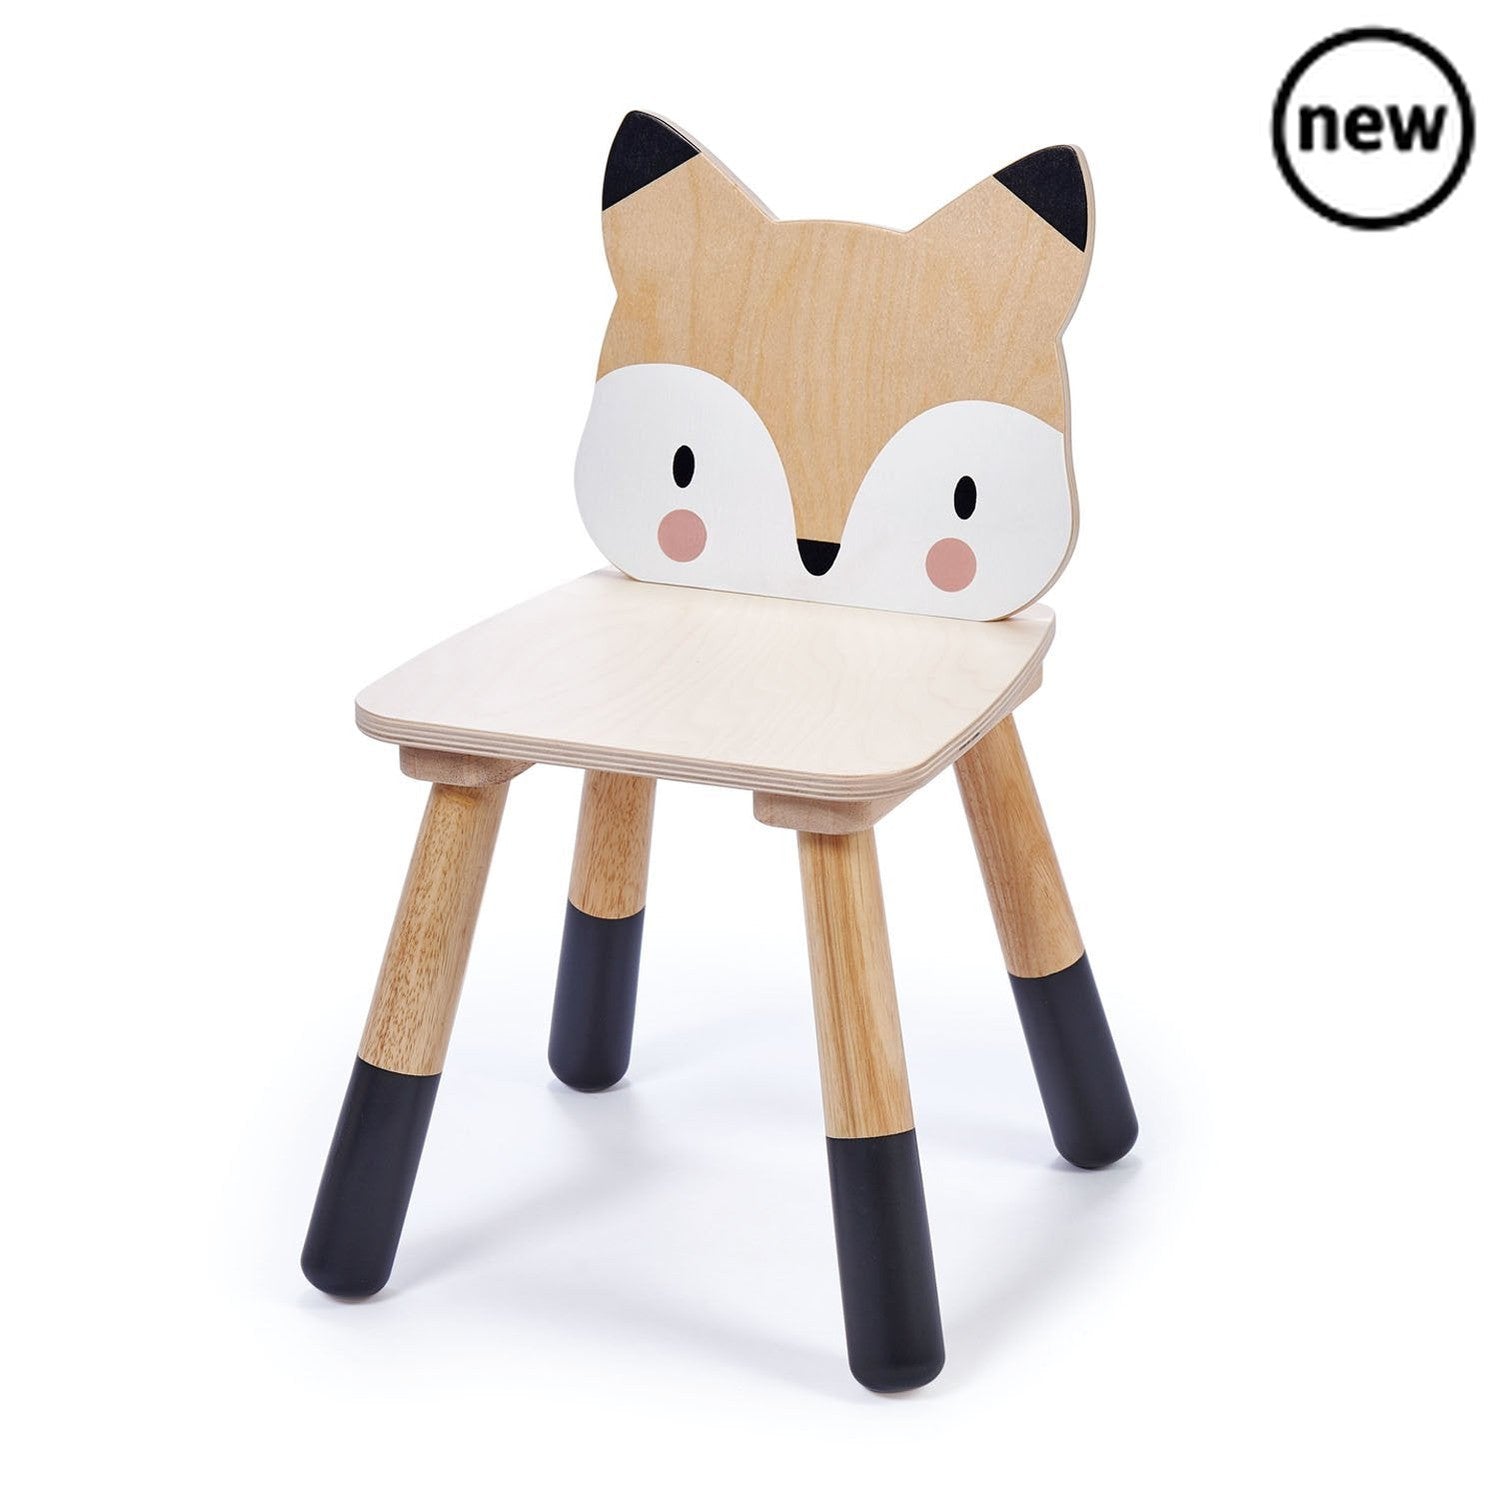 Tenderleaf Toys Wooden Forest Fox Chair, Whoever heard of Fox in socks...? This fun high quality plywood Fox chair by Tender Leaf Toys works perfectly with the Tender Leaf Toys Forest table, or your own small table. Children will love sitting in this very fun Fox chair! Self Assembly 32 x 30 x 48cm, Tenderleaf Toys Wooden Forest Fox Chair,Wooden Toys,Tenderleaf, 